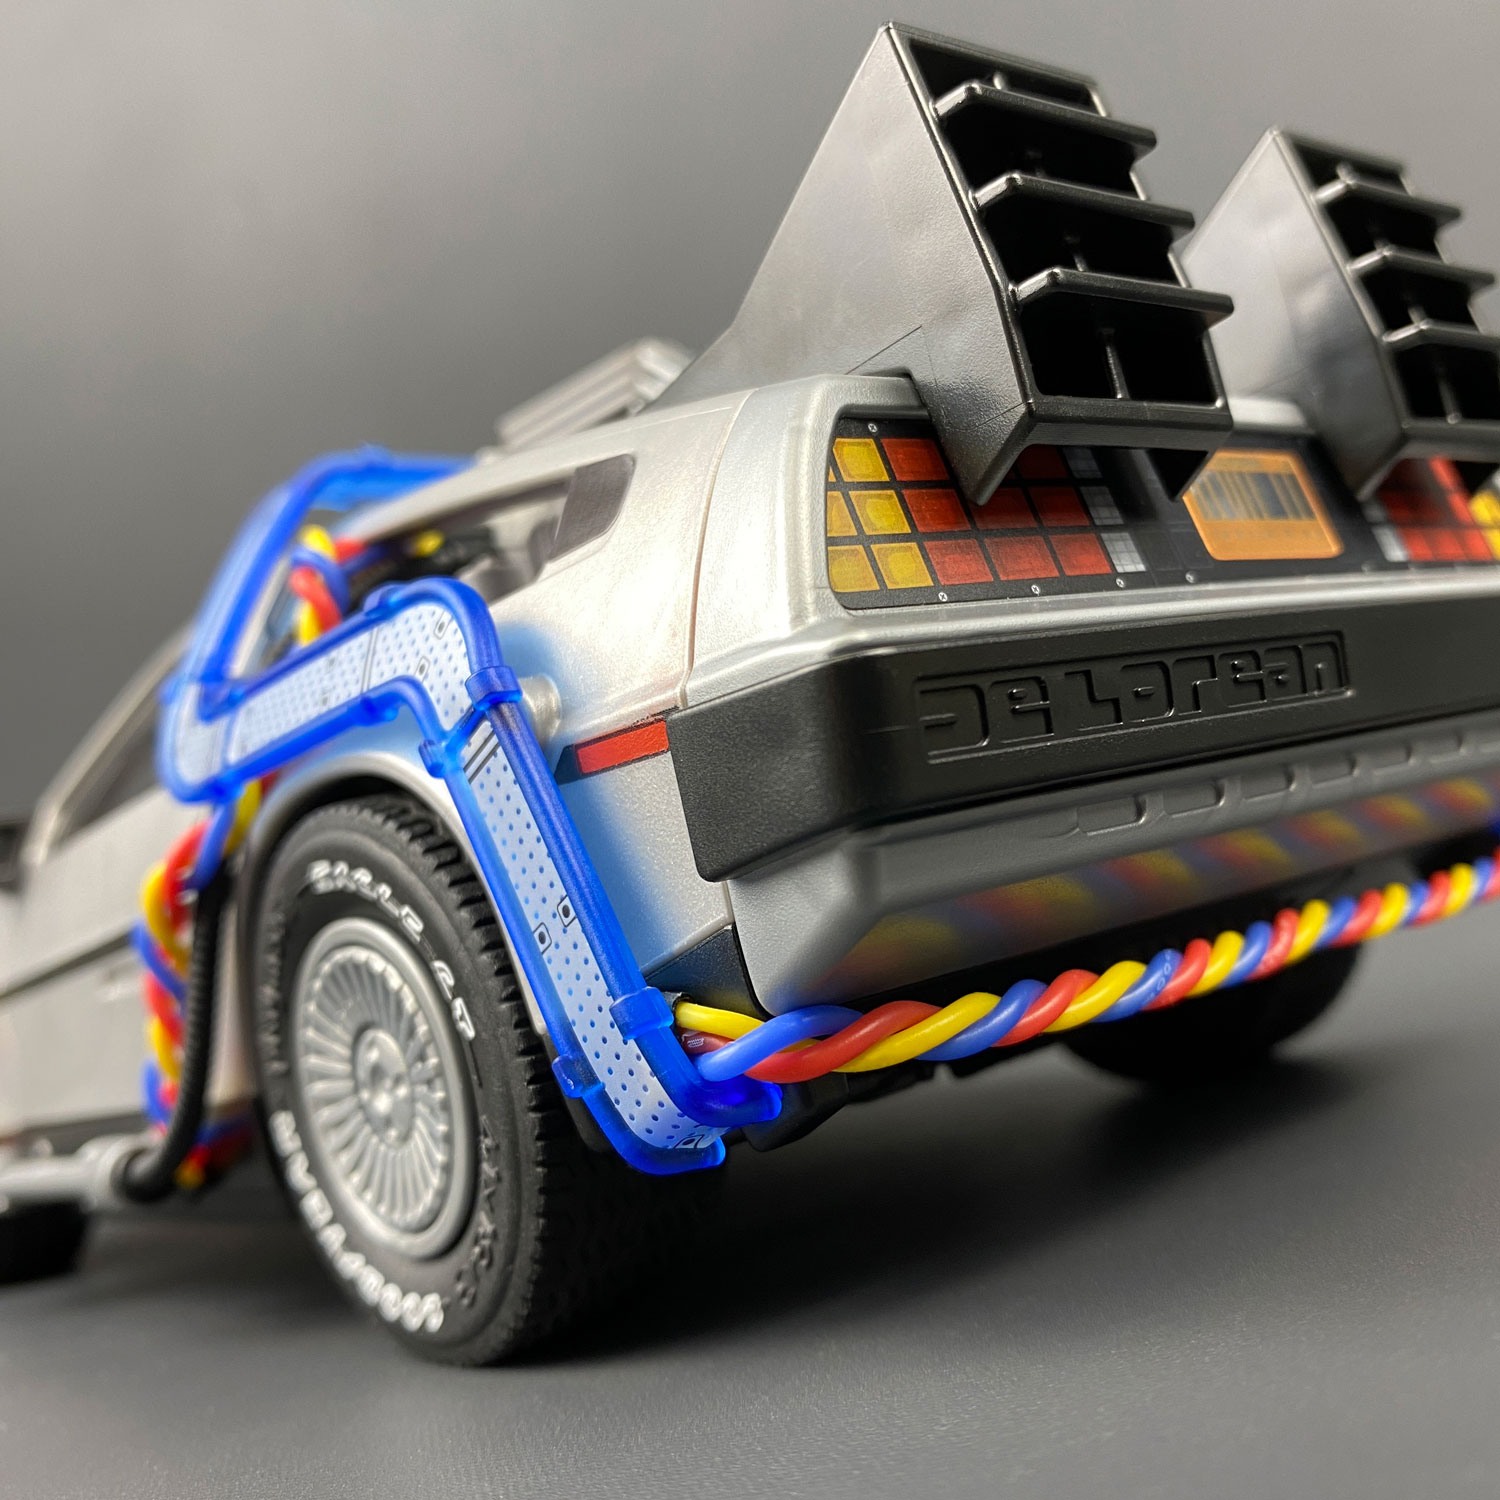 Rear of Playmobil DeLorean Flux Wires accessory installed